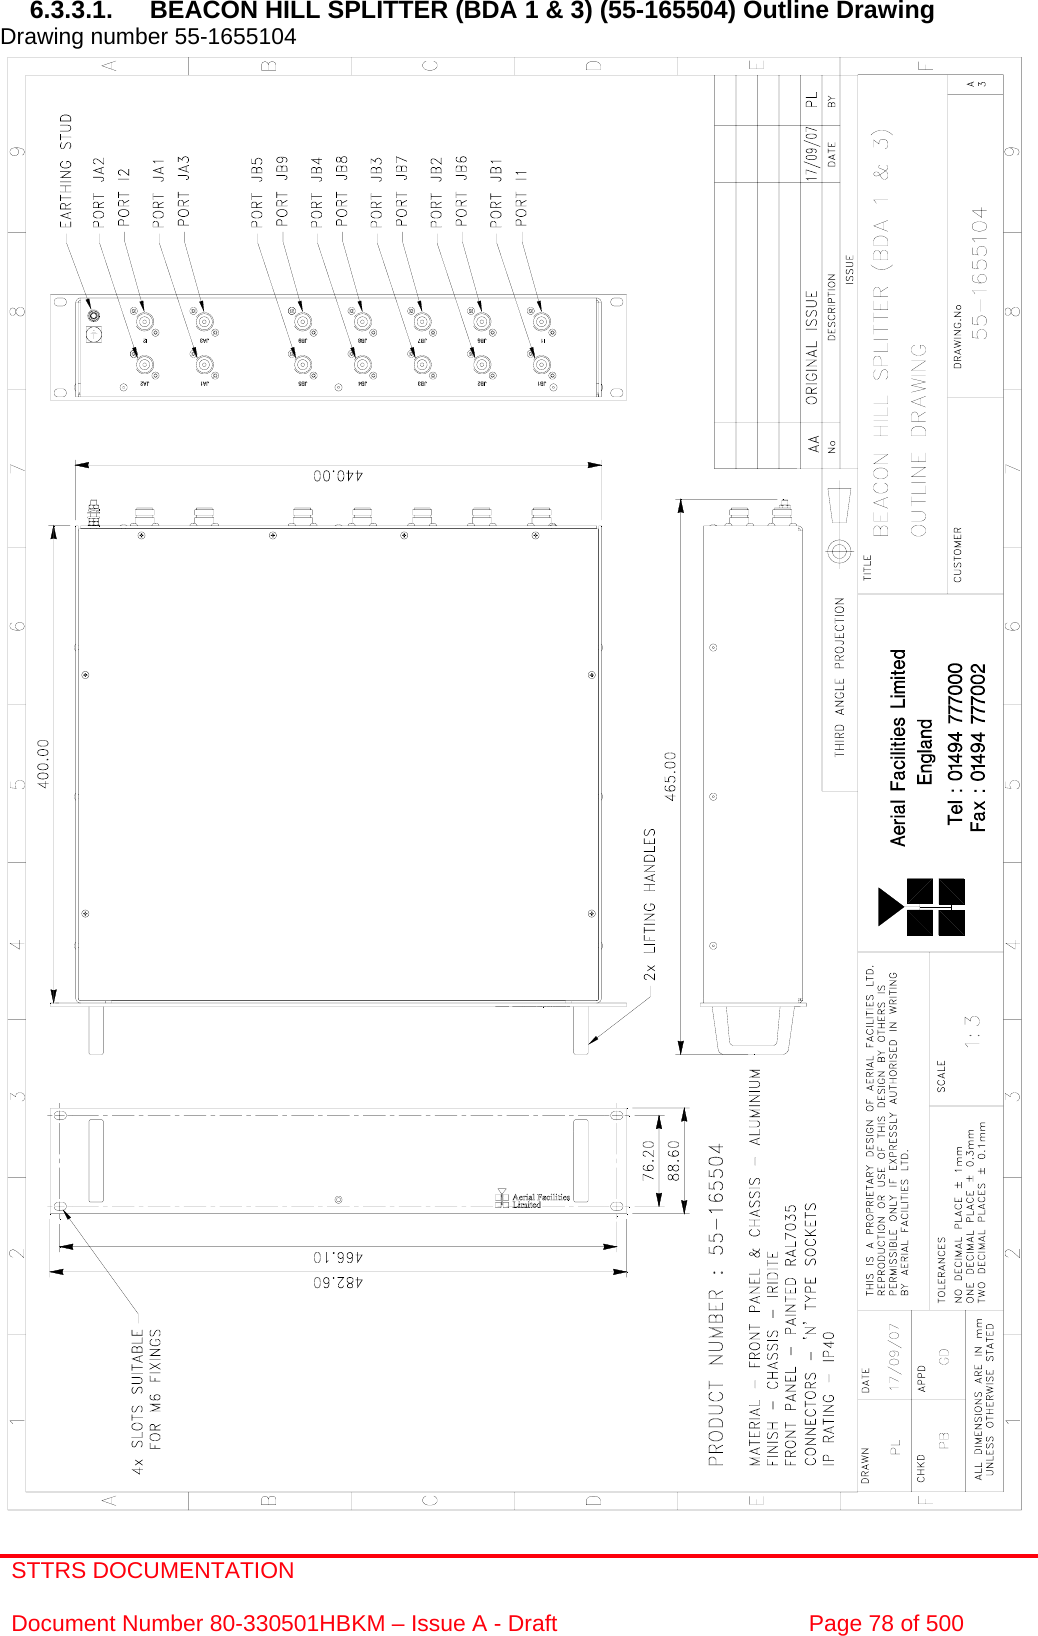 STTRS DOCUMENTATION  Document Number 80-330501HBKM – Issue A - Draft  Page 78 of 500   6.3.3.1.  BEACON HILL SPLITTER (BDA 1 &amp; 3) (55-165504) Outline Drawing  Drawing number 55-1655104                                                   